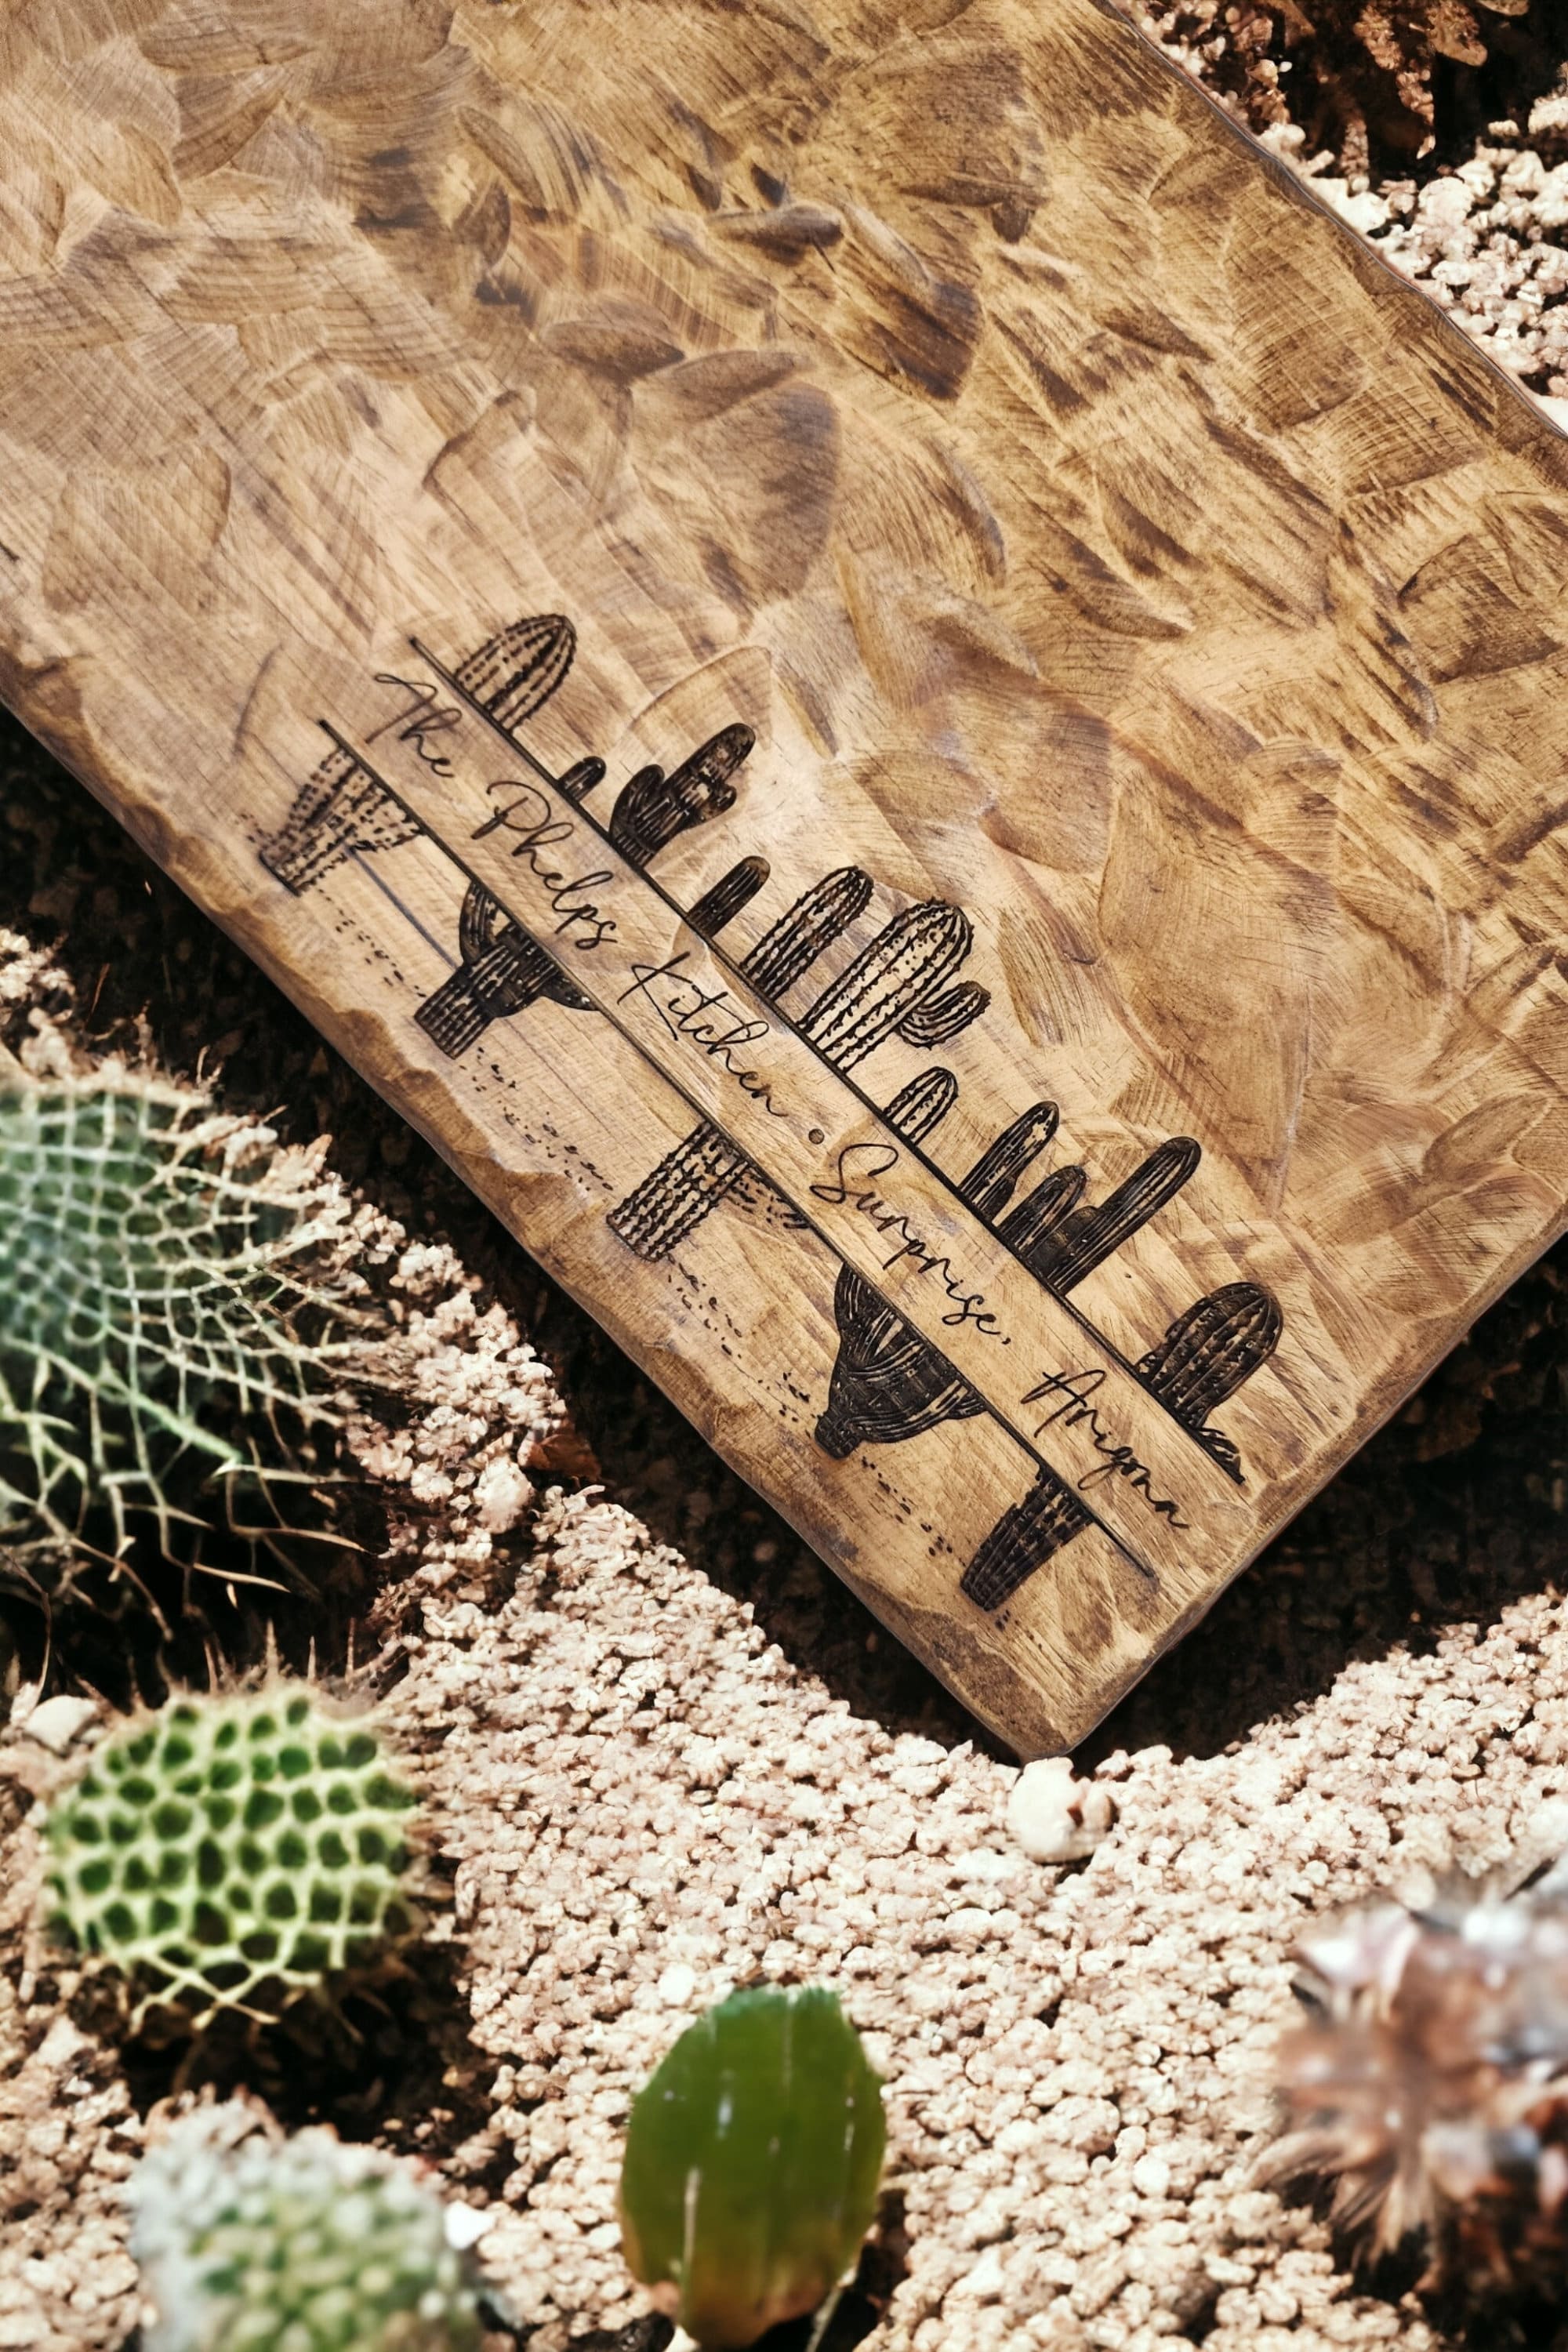 Custom Wood Burning Patterns: Cactus // Easy Pattern Template Design //  Pyrography Art // Instant Download PDF File // Cutting Board Gift -   Denmark